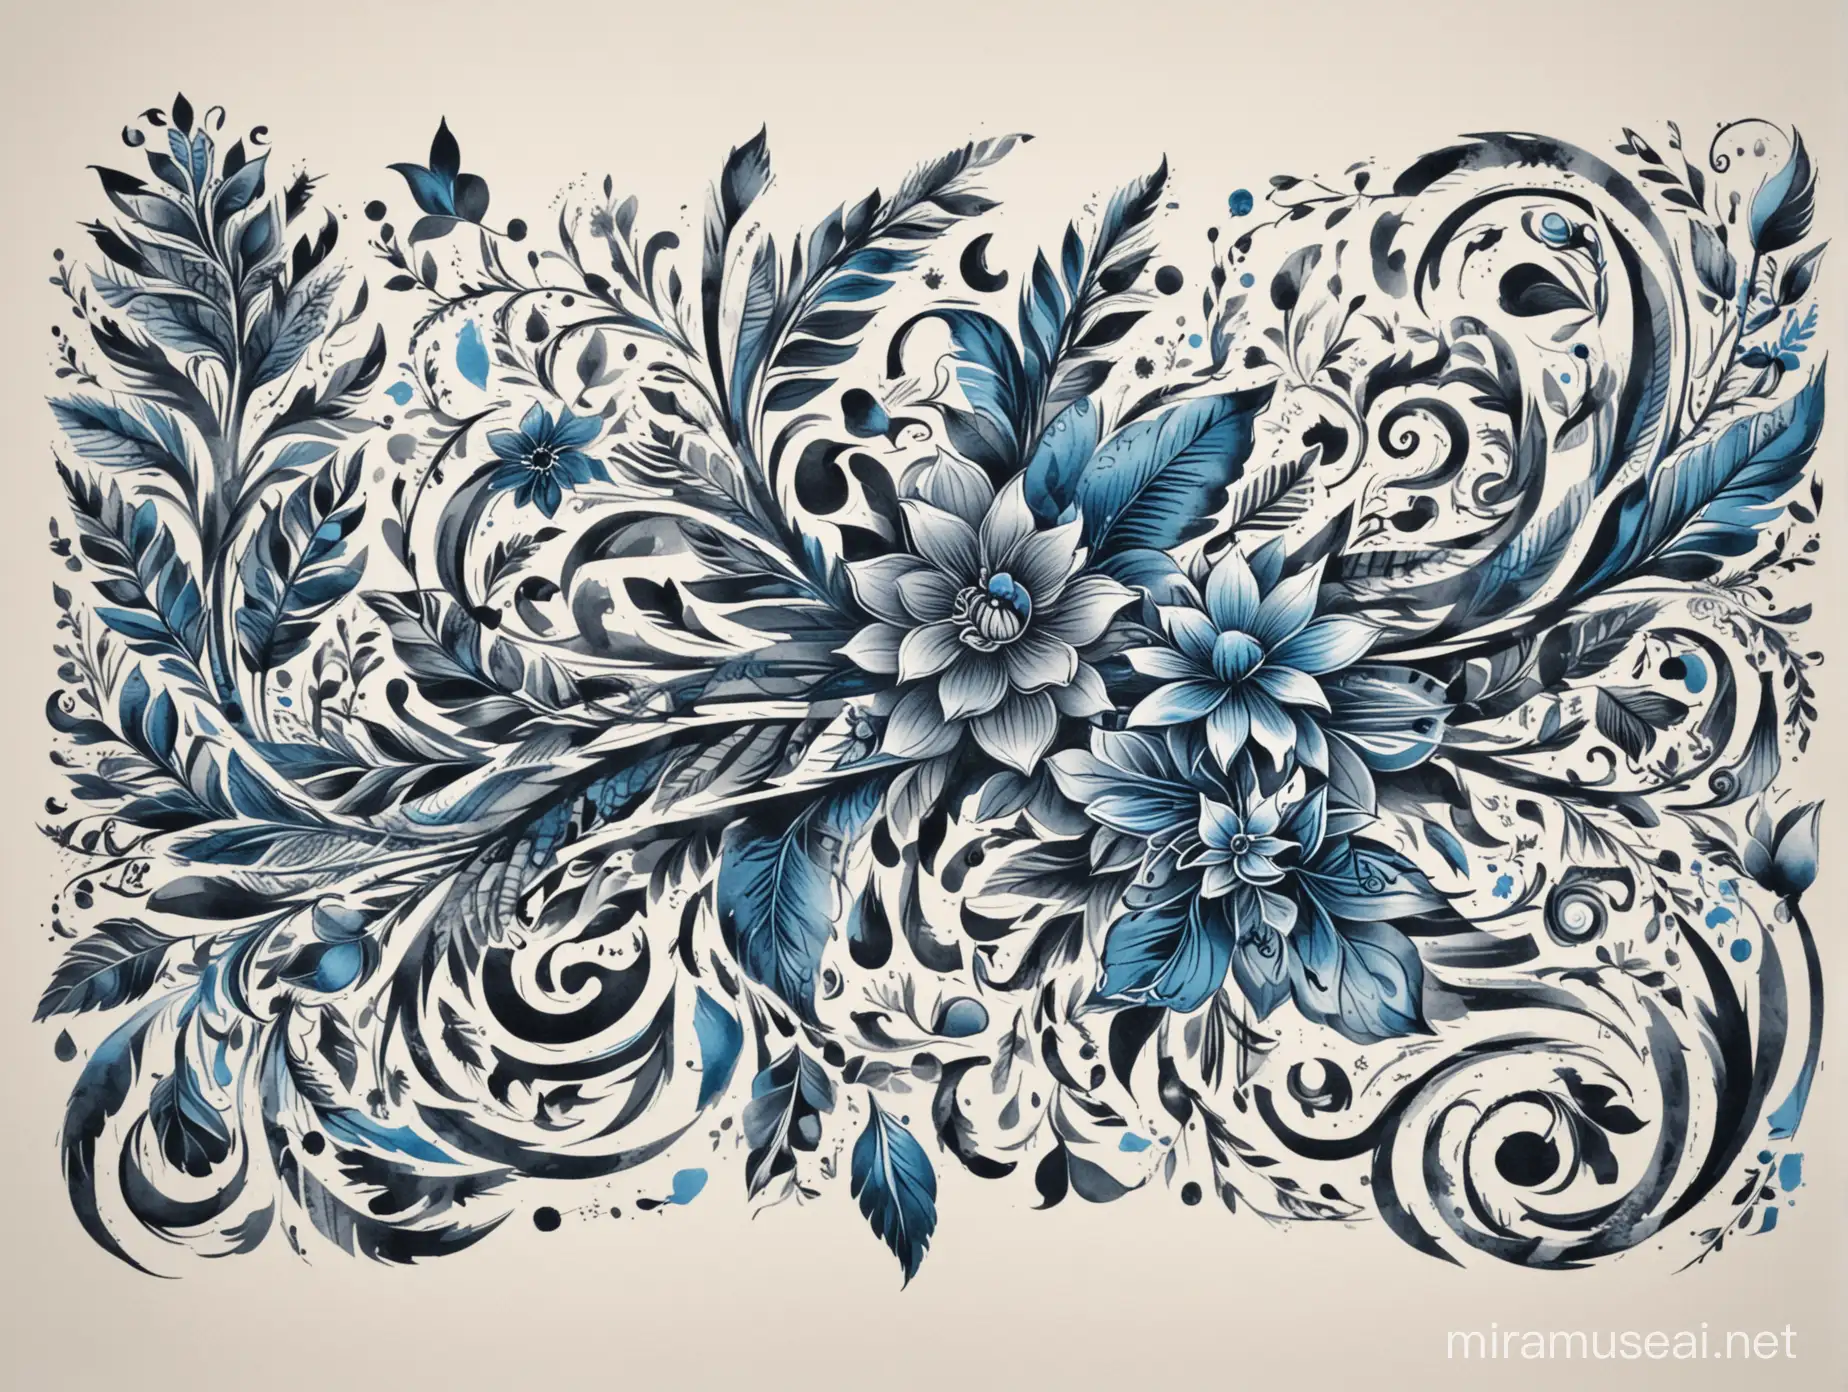 Tribal Tattoo Style Vector Image with Blue Grey and Black Floral and Musical Notes